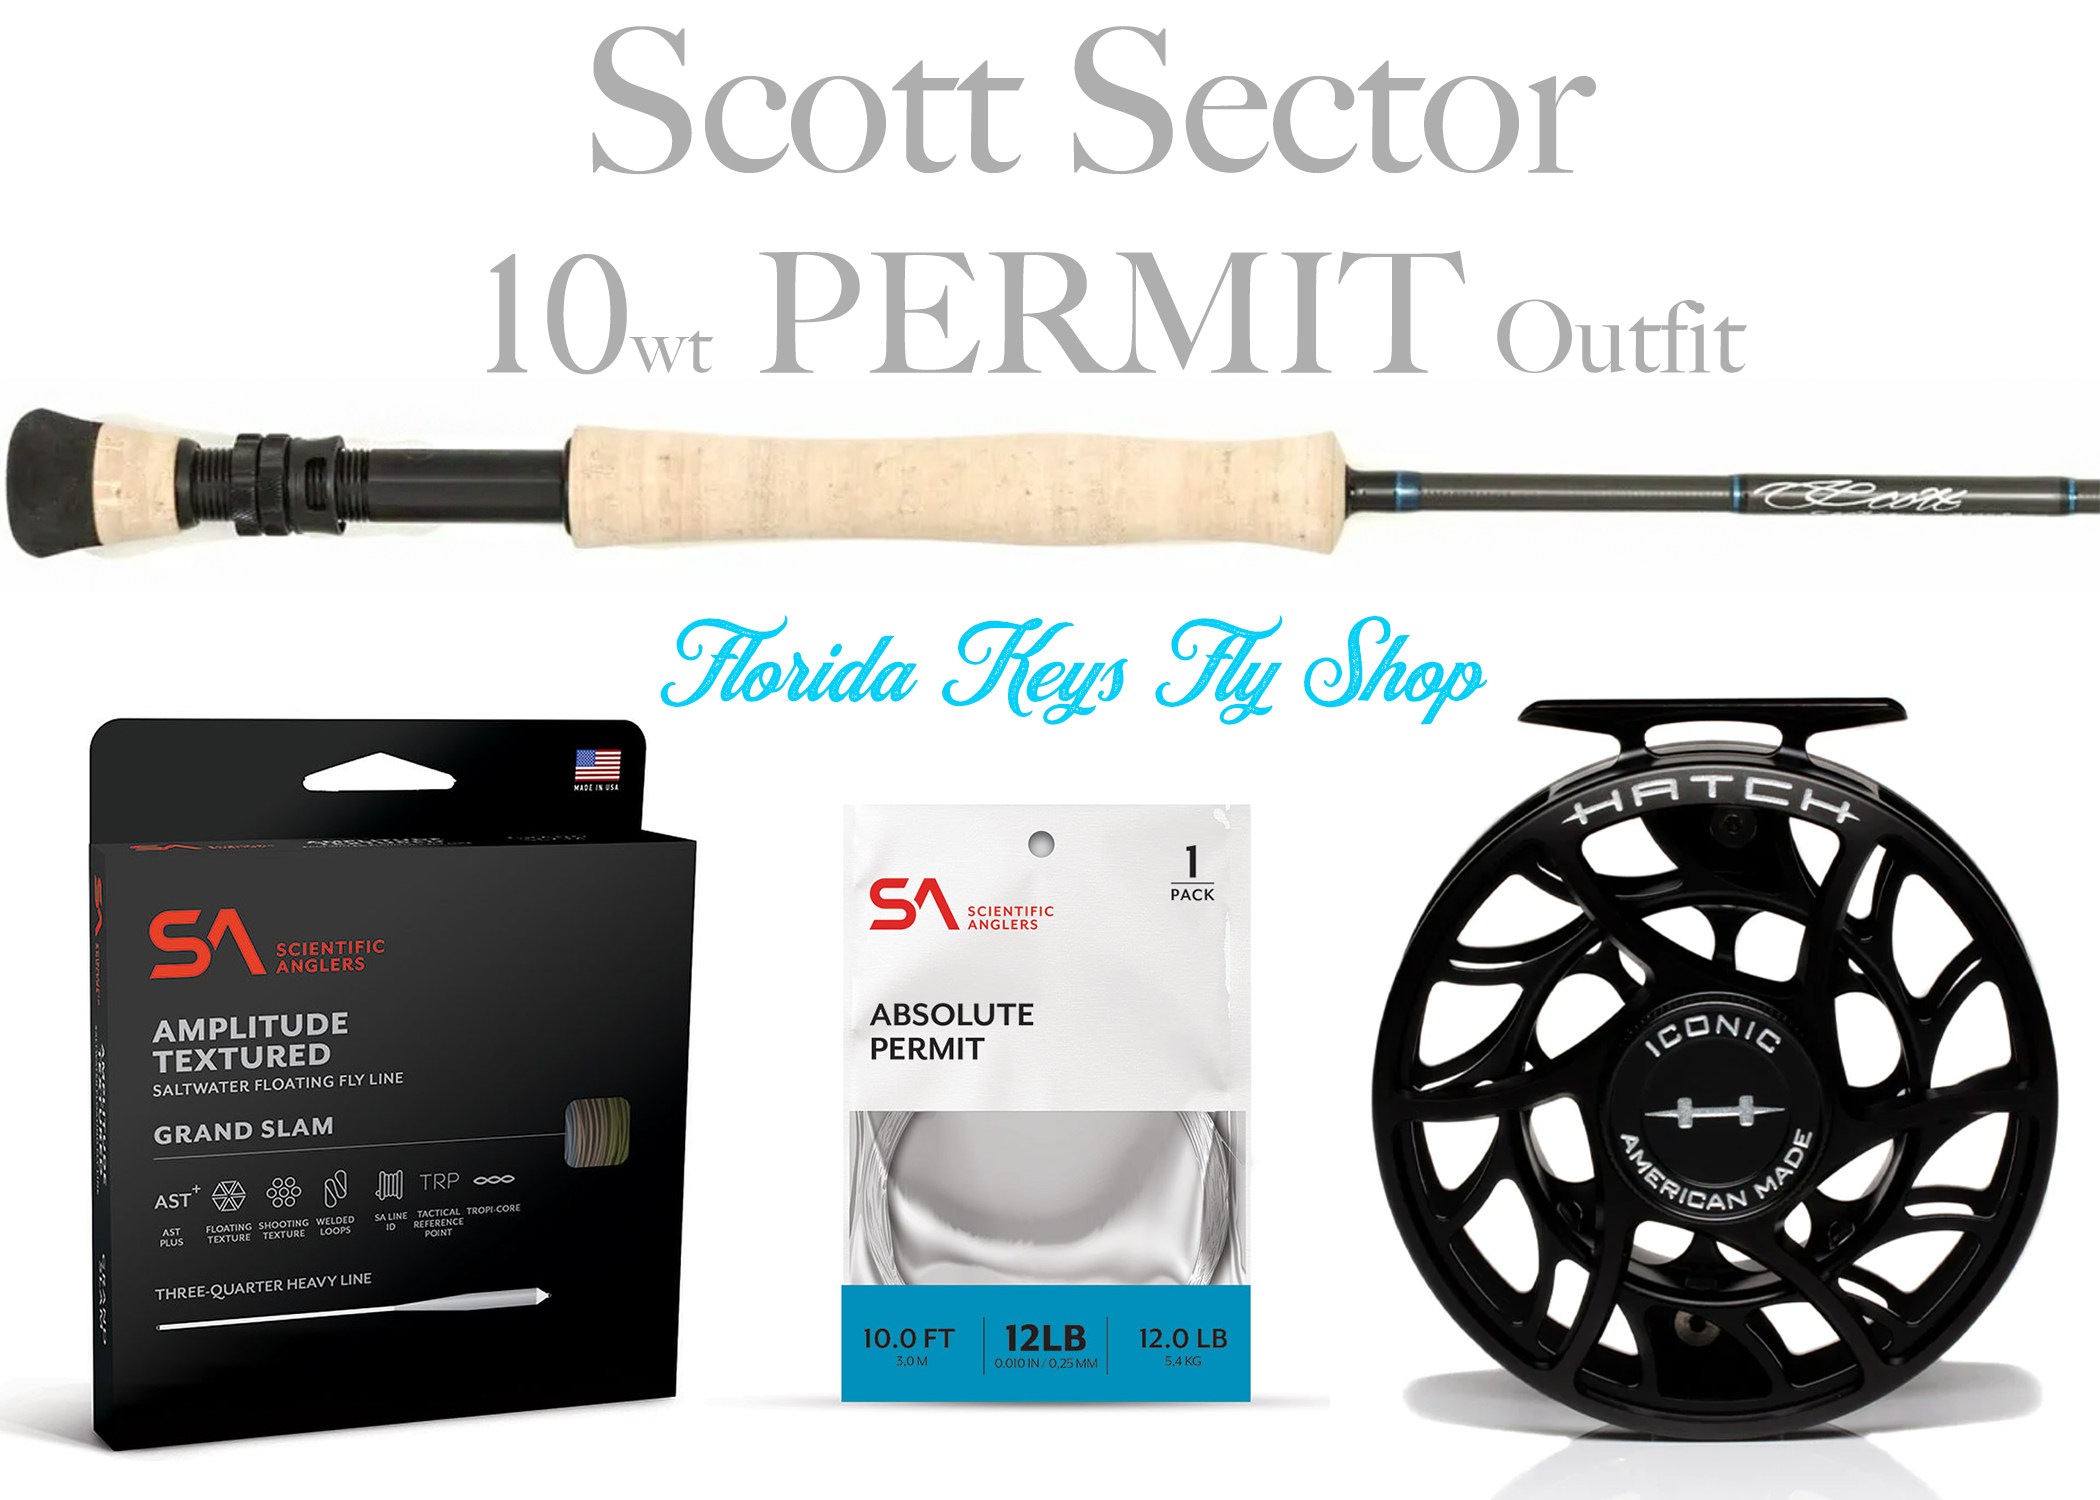 Scott Sector 10wt PERMIT Fly Rod Outfit Combo